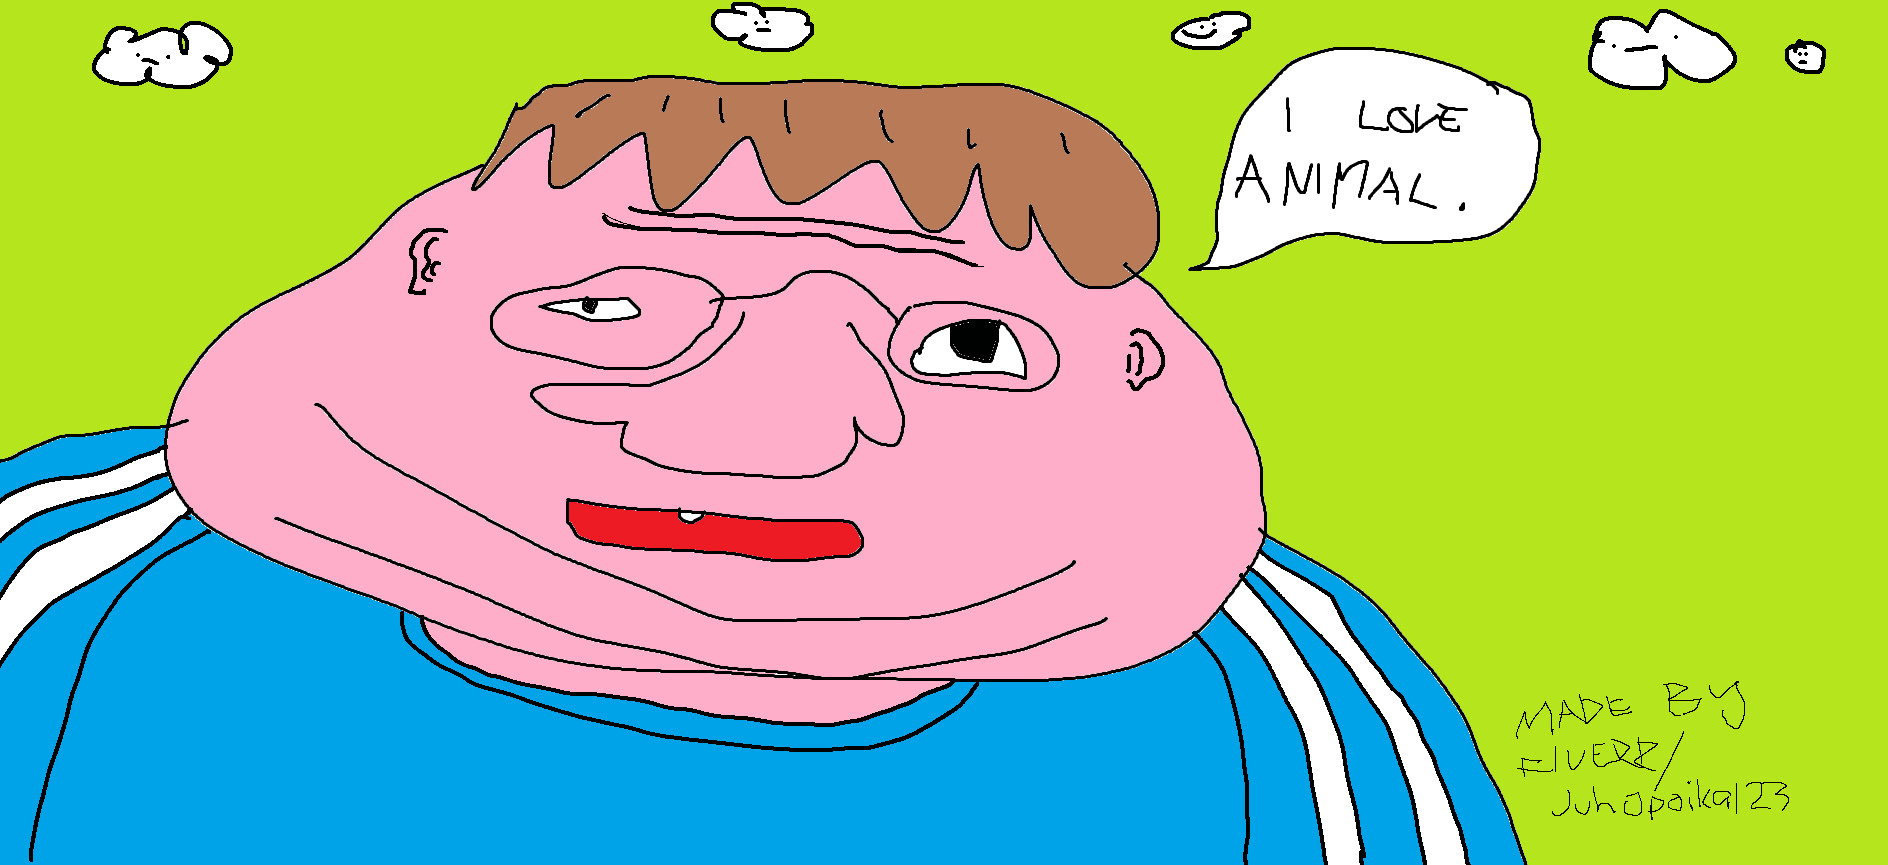 bad ms paint drawings